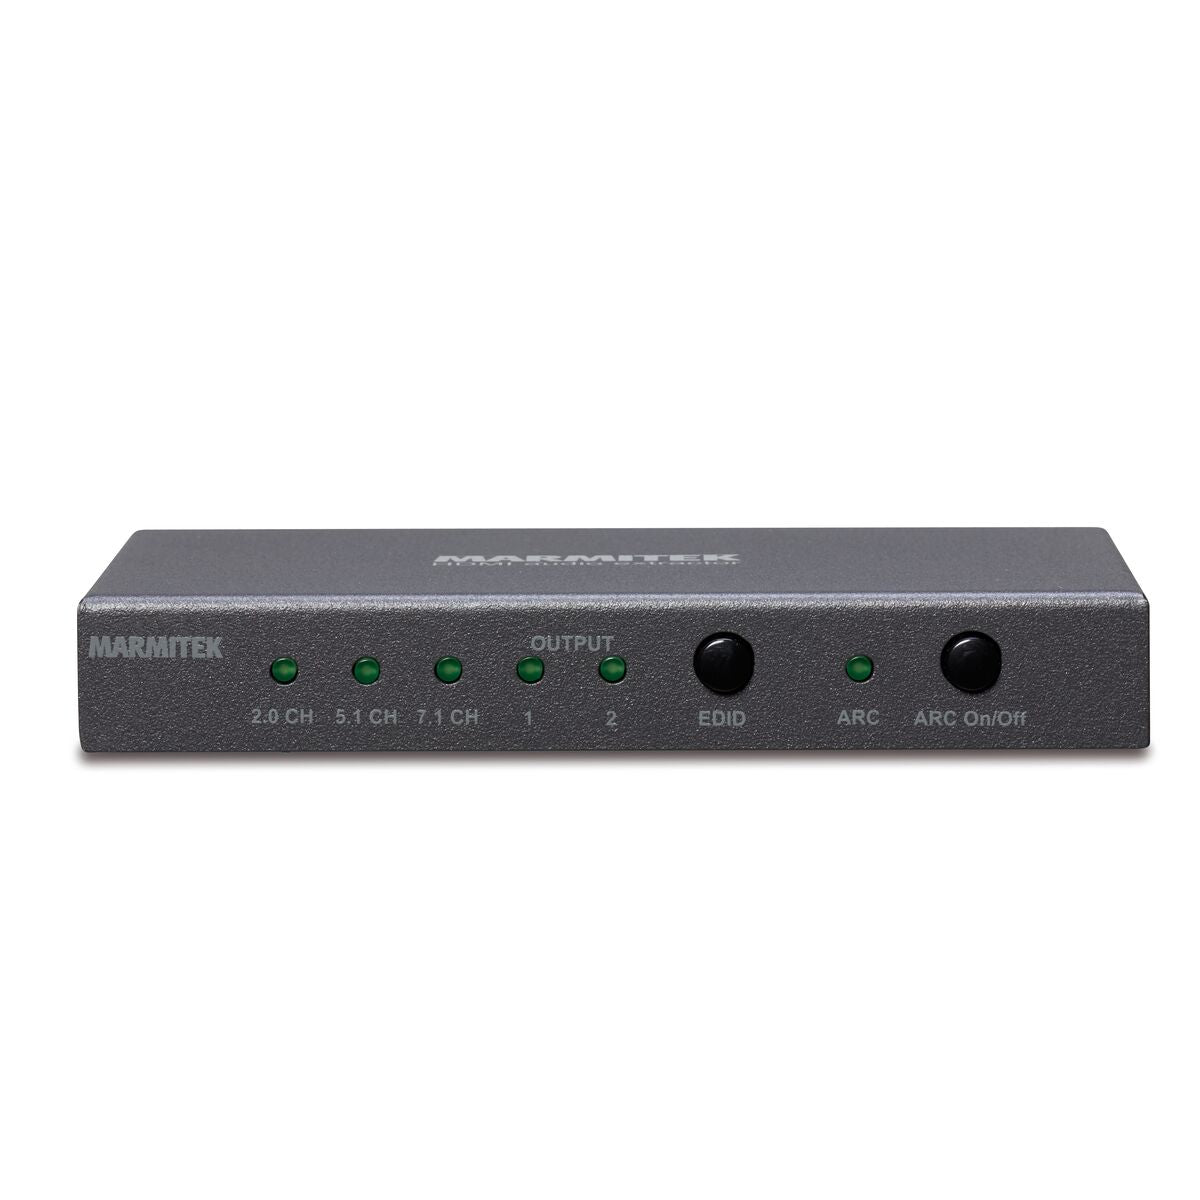 Connect AE24 UHD 2.0 - Estrattore audio HDMI 4K - 4K60 - HDR - ARC - 18 Gbps